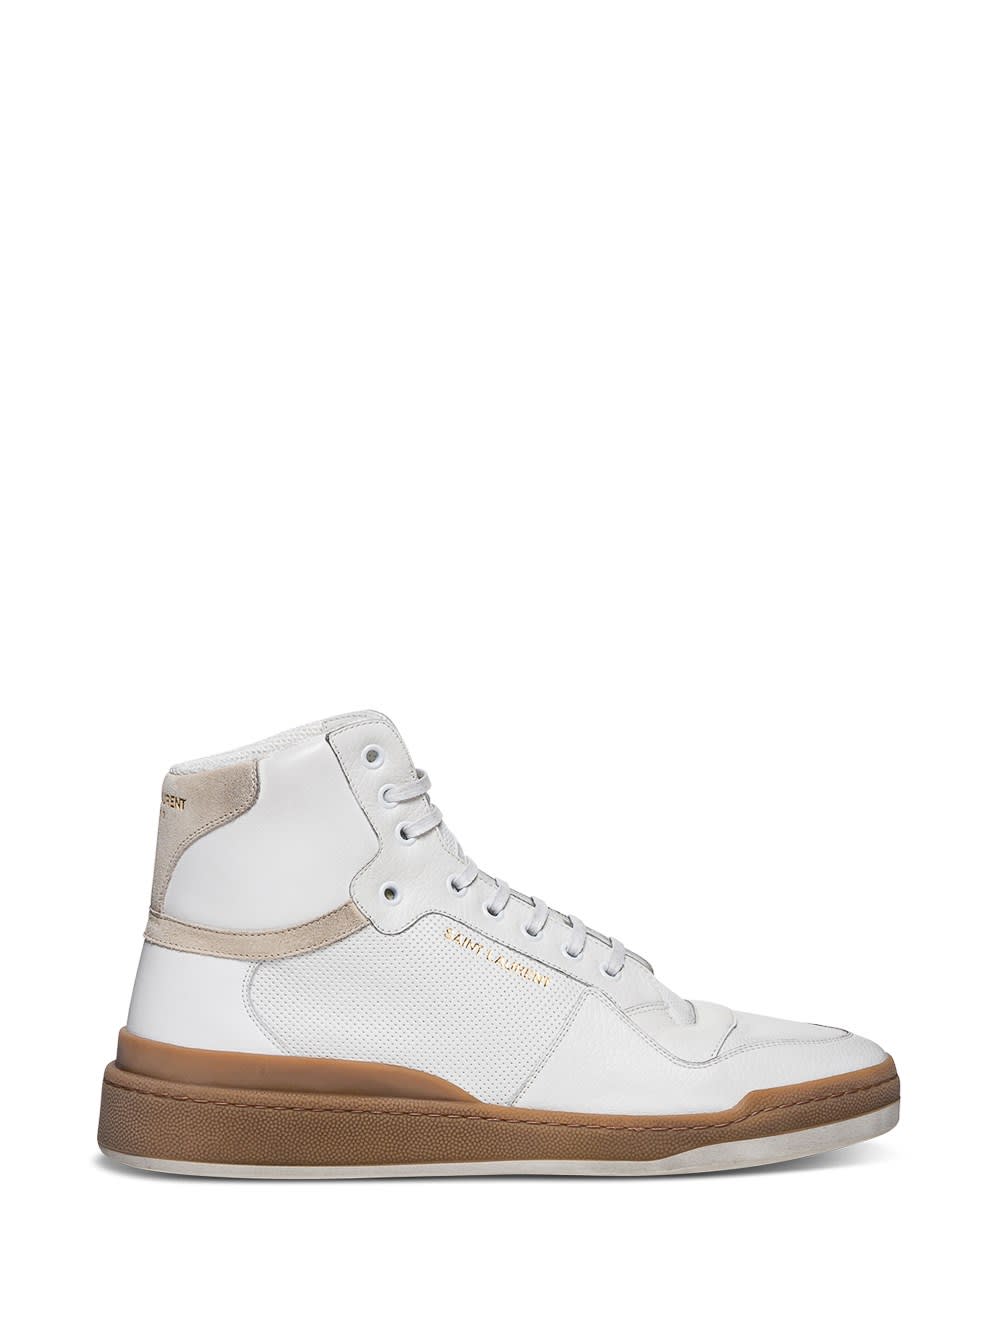 SAINT LAURENT SL24 MID-TOP SNEAKERS IN LEATHER AND SUEDE,61061804GA09298